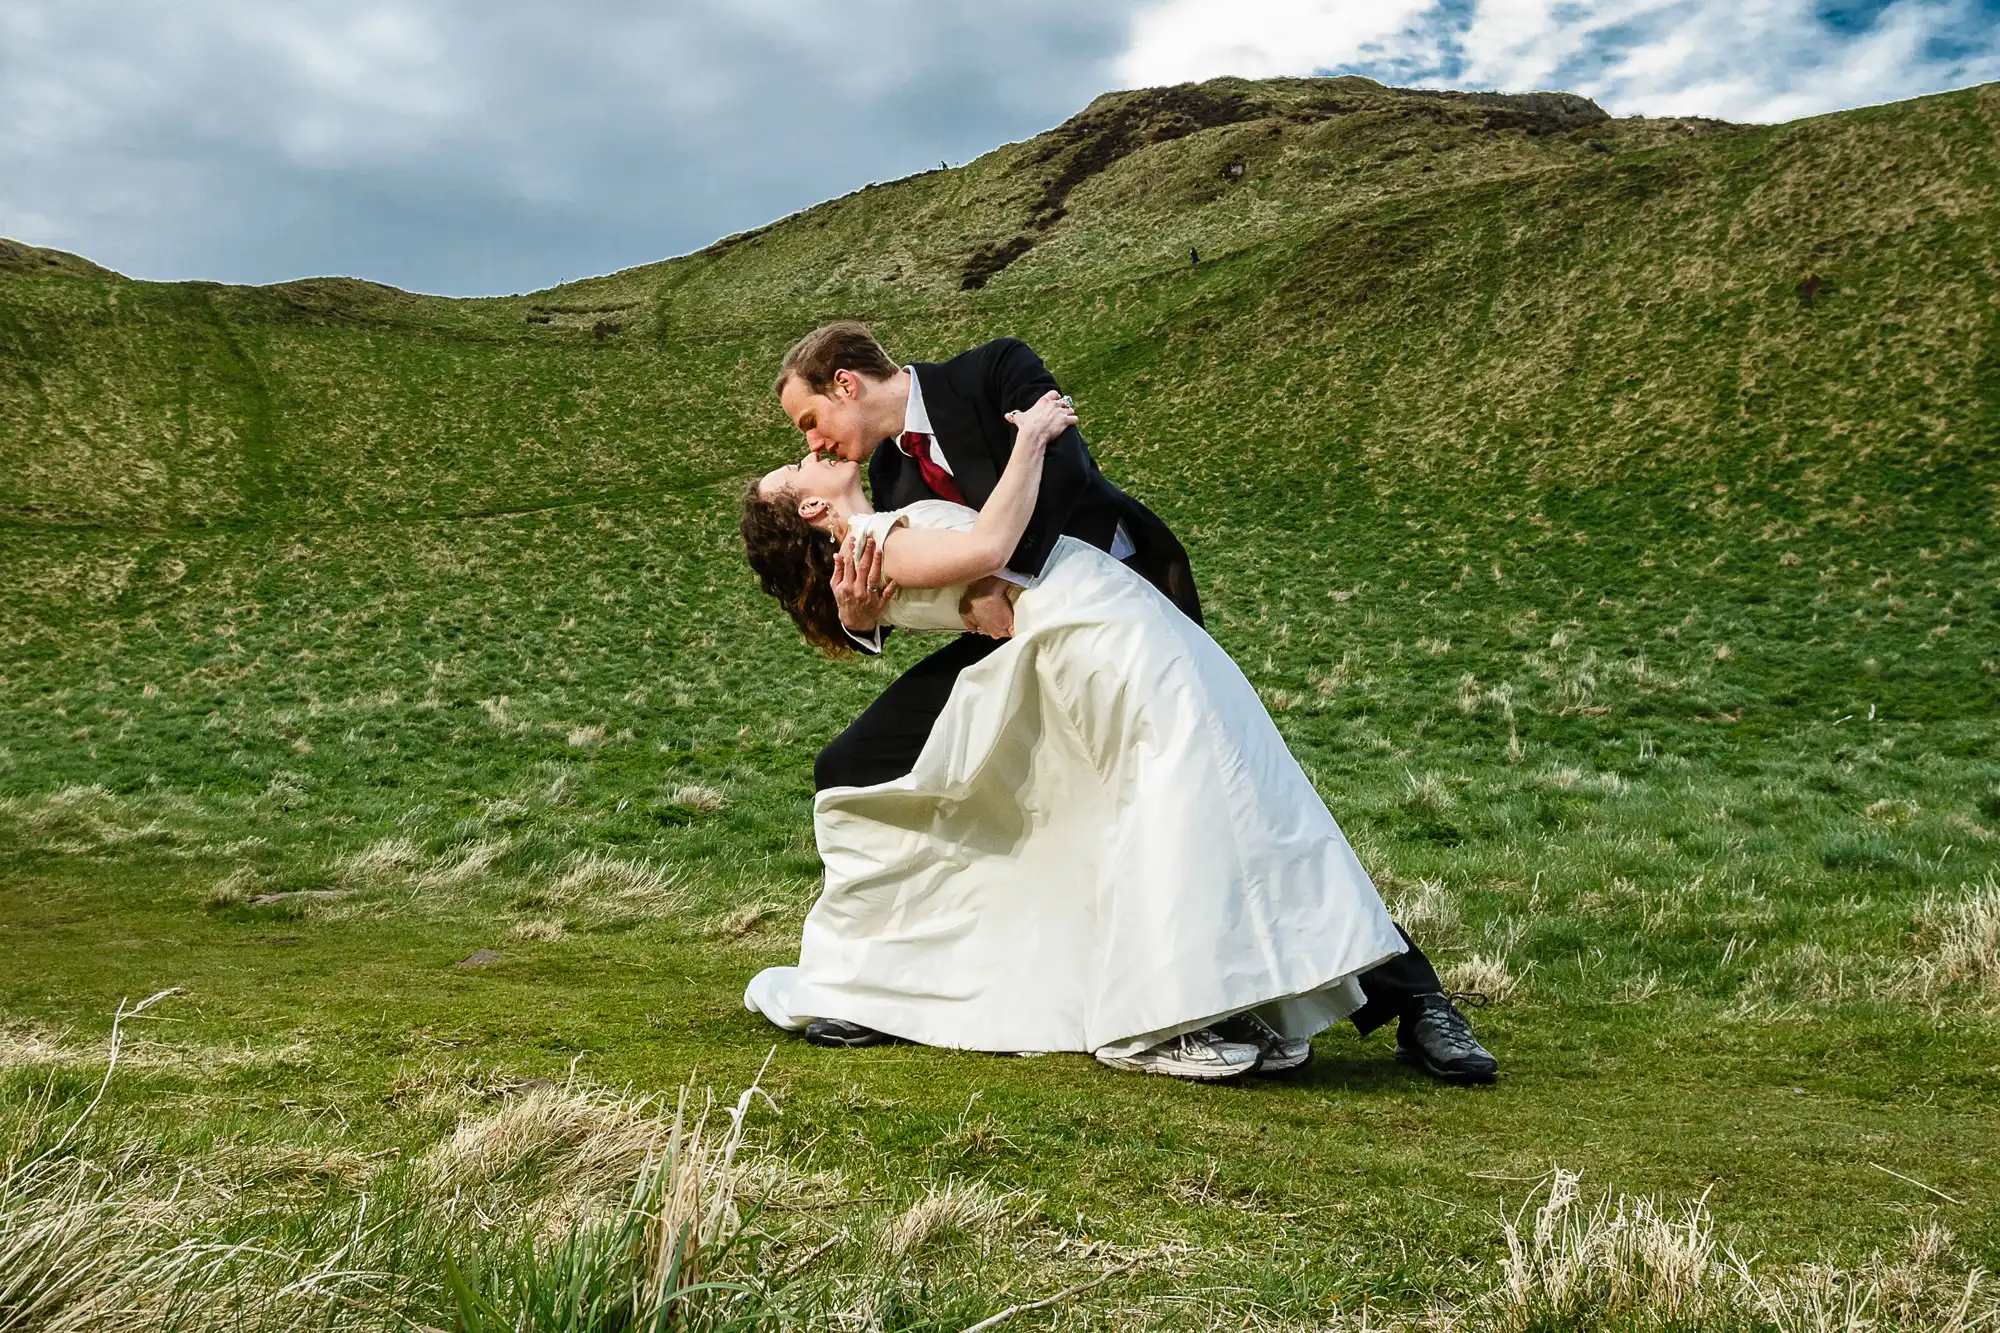 A bride and groom sharing a kiss while performing a dip in a lush, green meadow with rolling hills in the background.